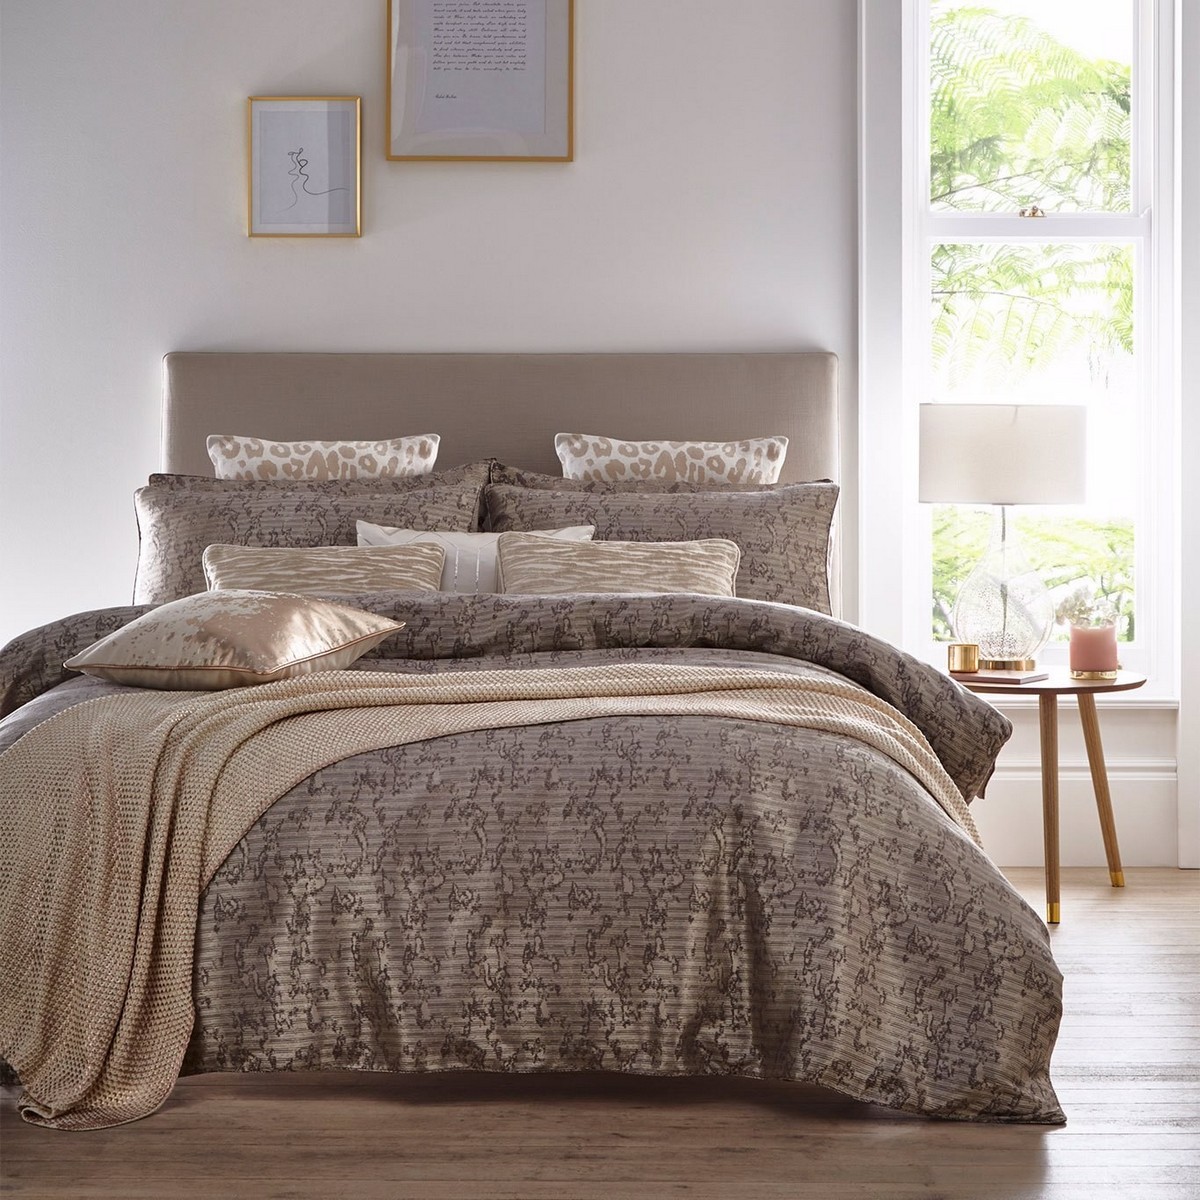 Lux Natural Duvet Set Fabric by Tess Daly